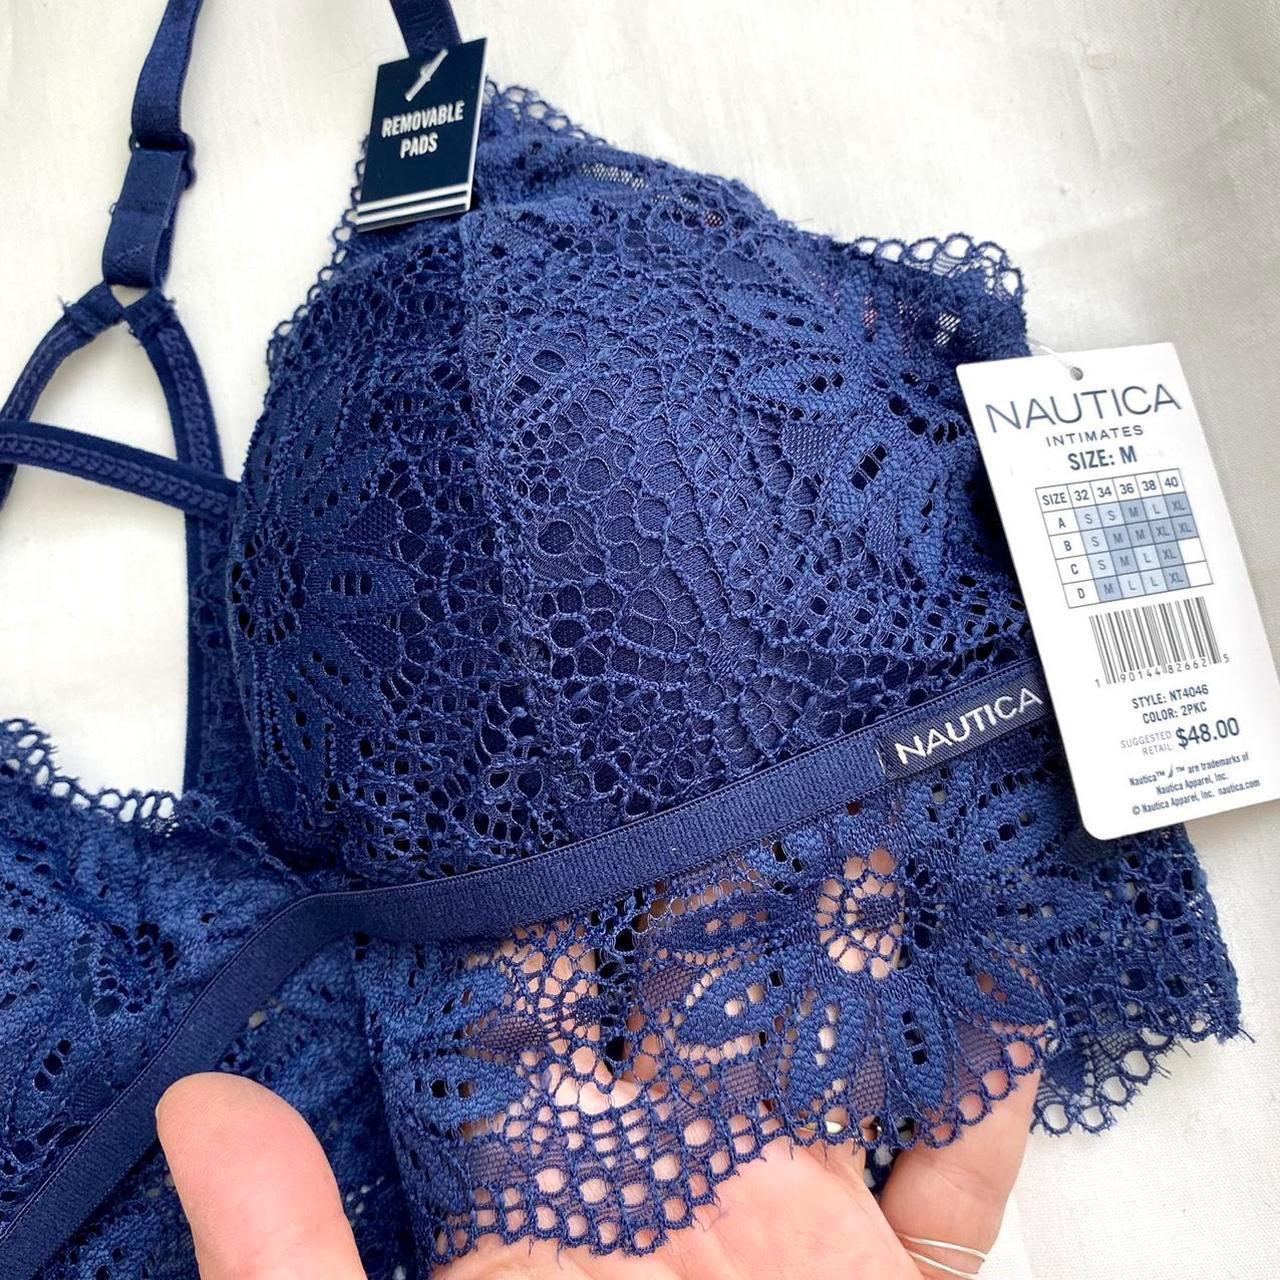 Nautica lace bralette in navy blue. Brand new with